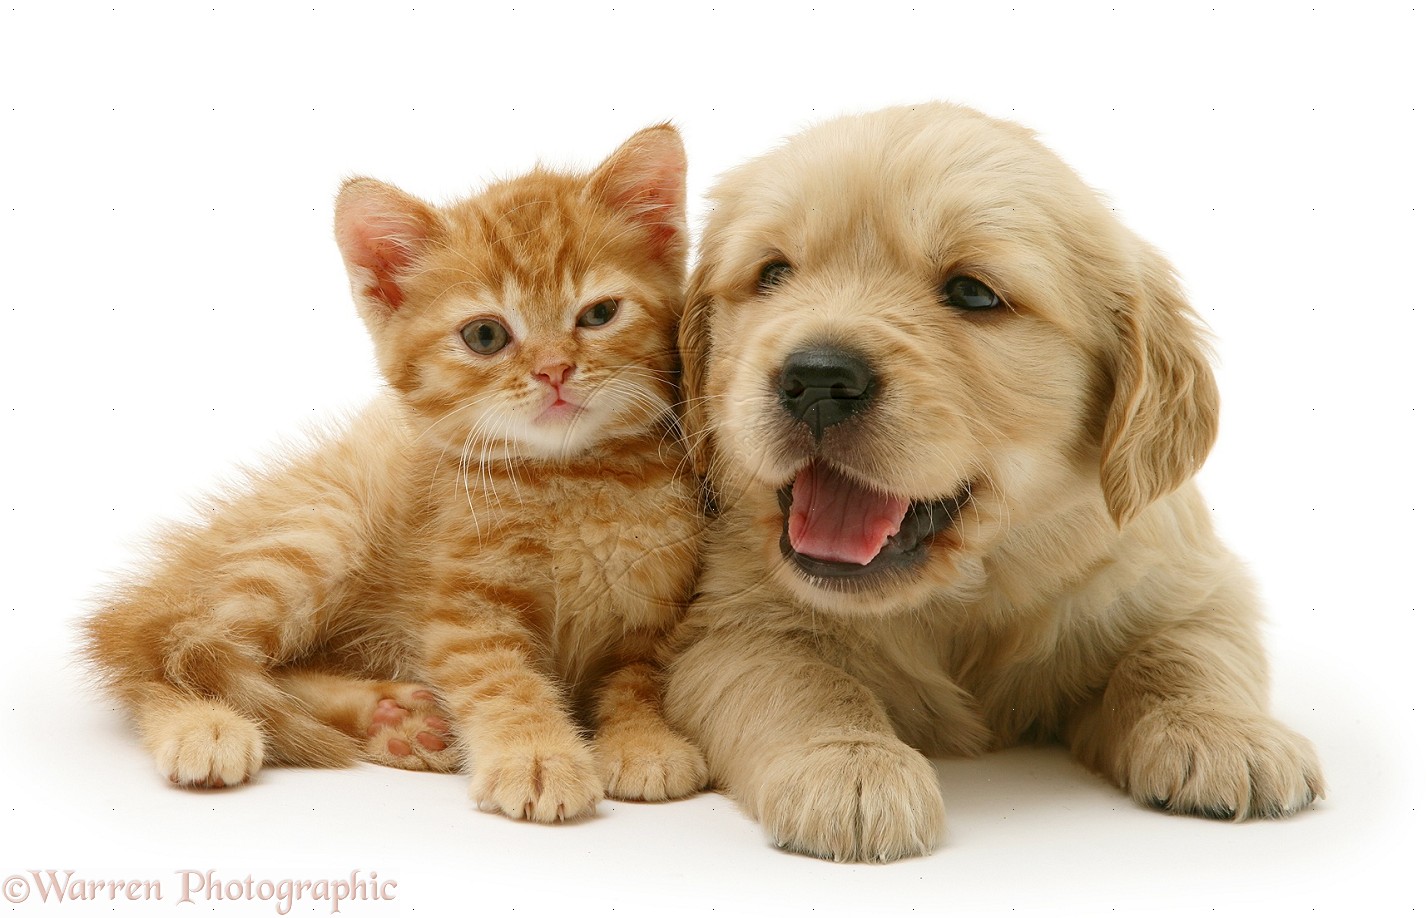 Pictures Of Baby Puppies And Kittens Desktop Backgrounds